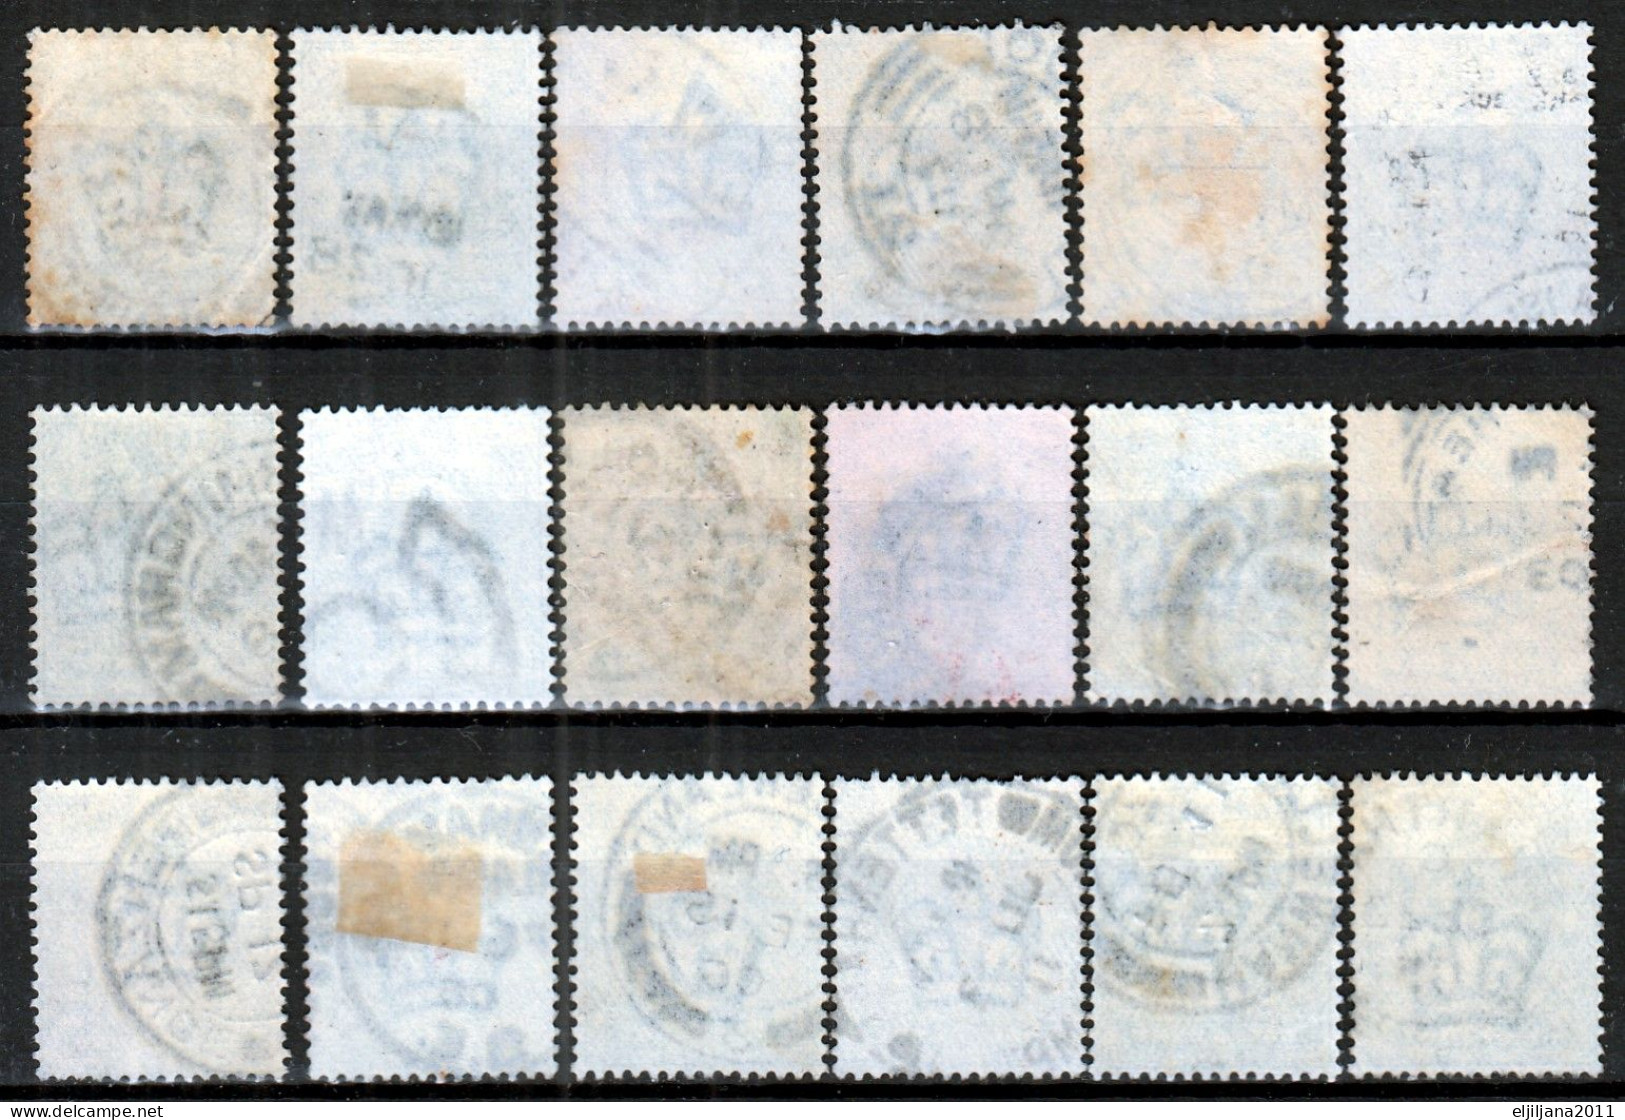 Great Britain - GB / UK 1902 - 1904 ⁕ KEVII. Half penny 18v used / shades / unchecked - postmark - see scan